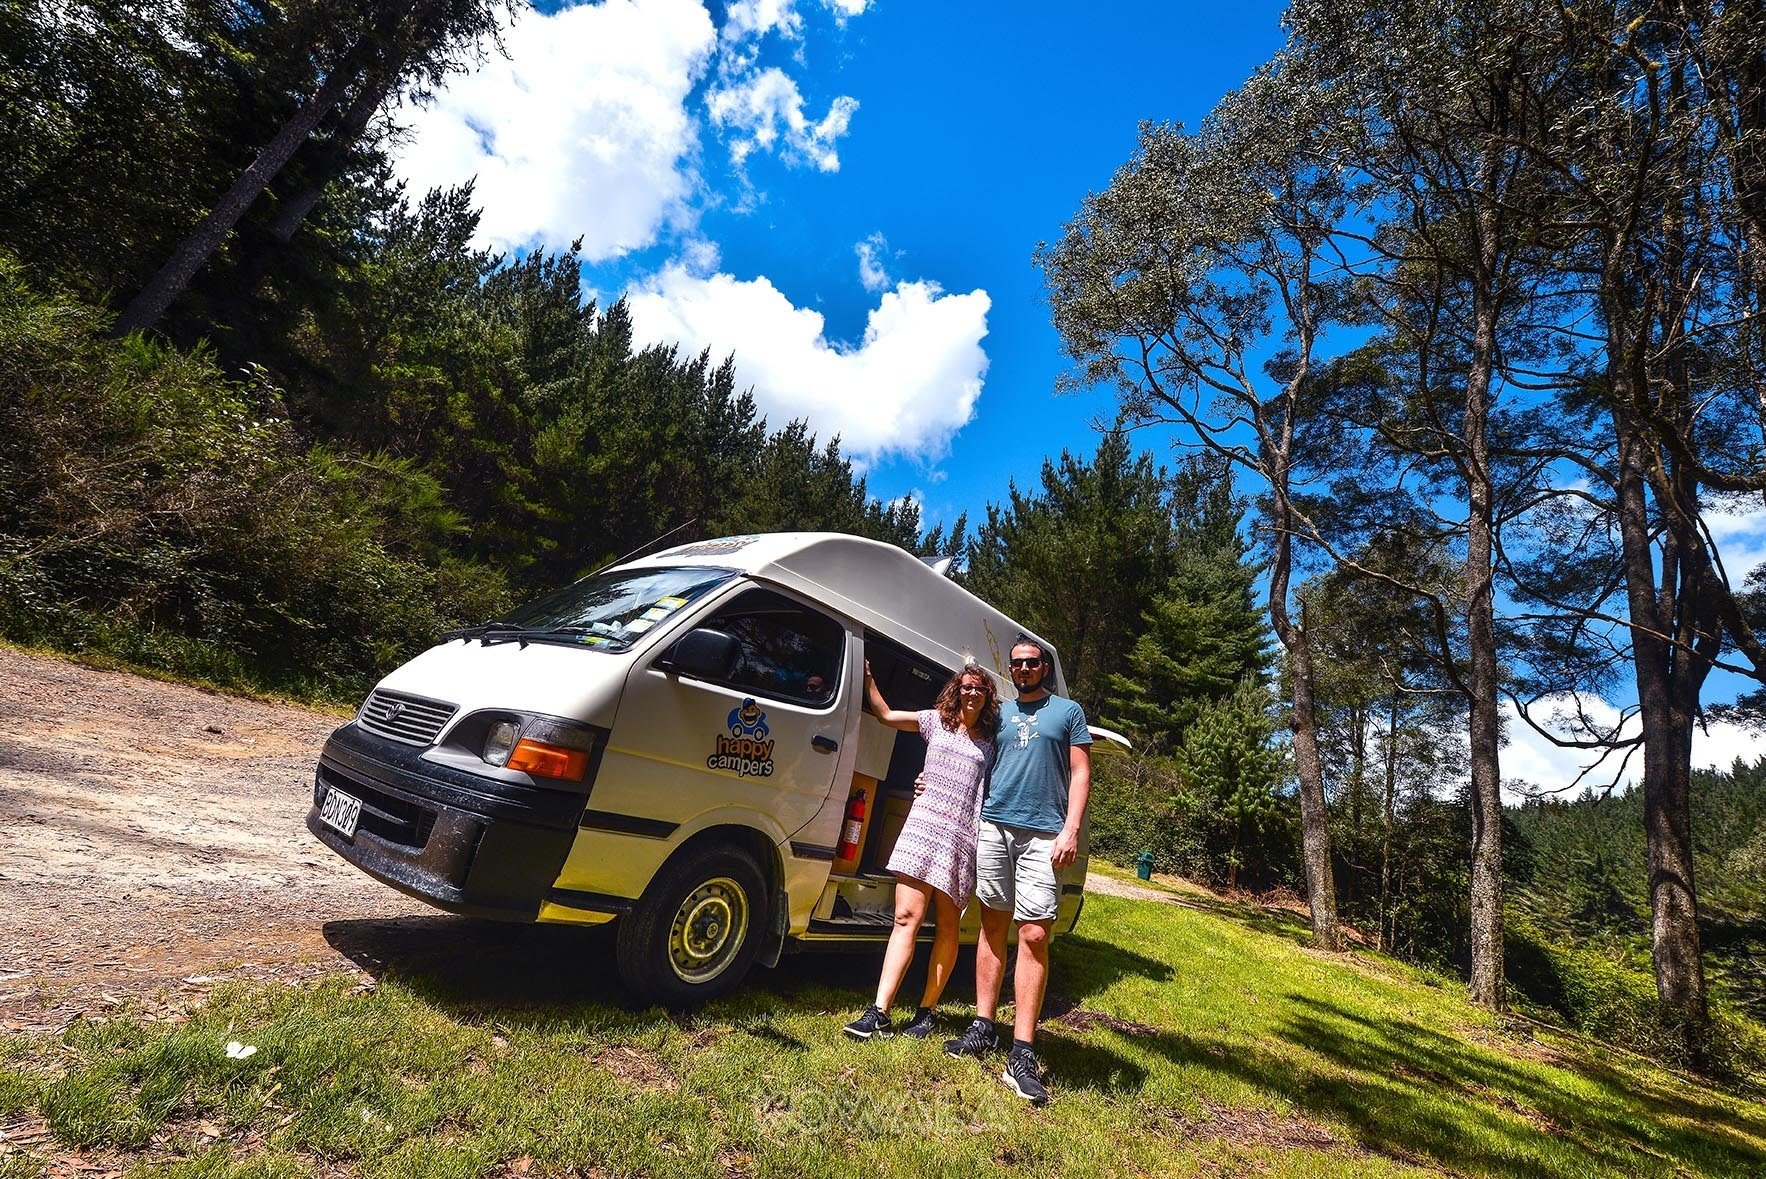 pvt nouvelle zelande new zealand whv road trip backpacker world planet country voyage aoteroa NZ camping